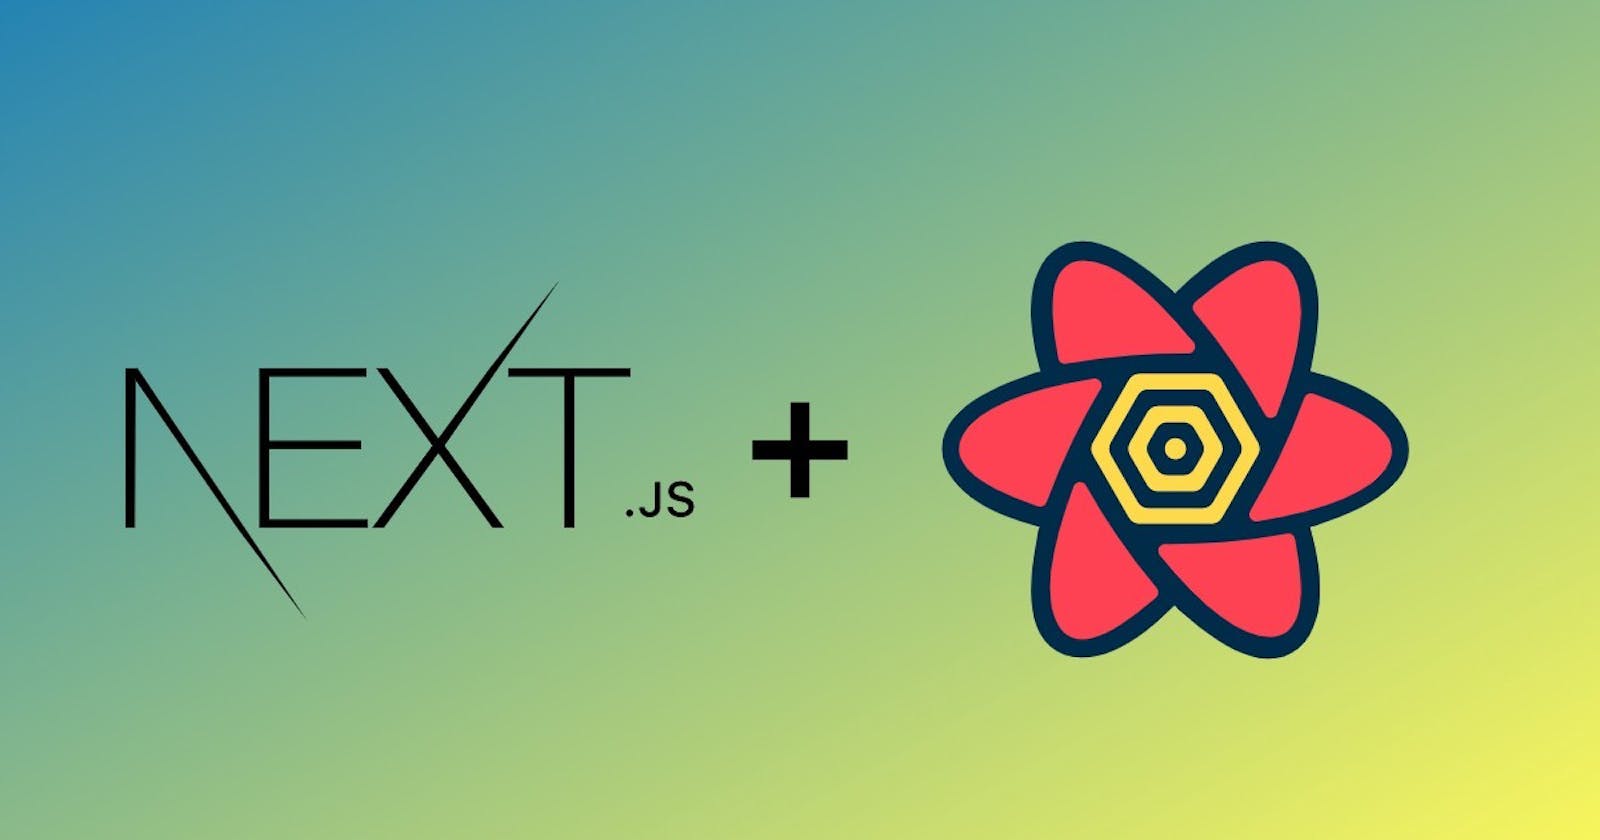 Authentication & Refresh token flow with Nextjs, Typescript, React Query and axios interceptors.